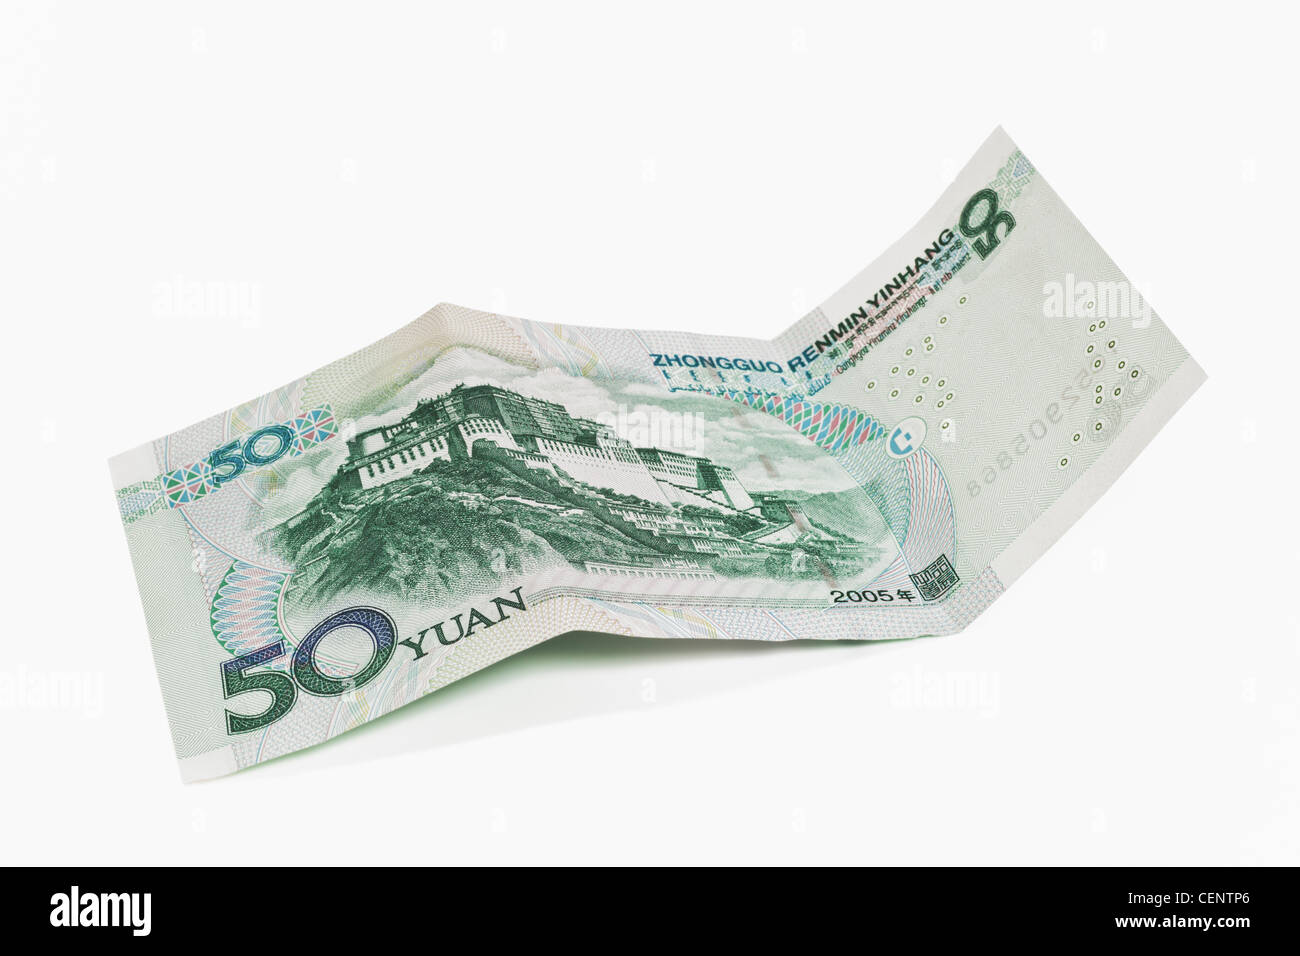 Back side of the 50 yuan bill. The renminbi, the Chinese currency, was introduced in 1949 after the founding of the PRC. Stock Photo